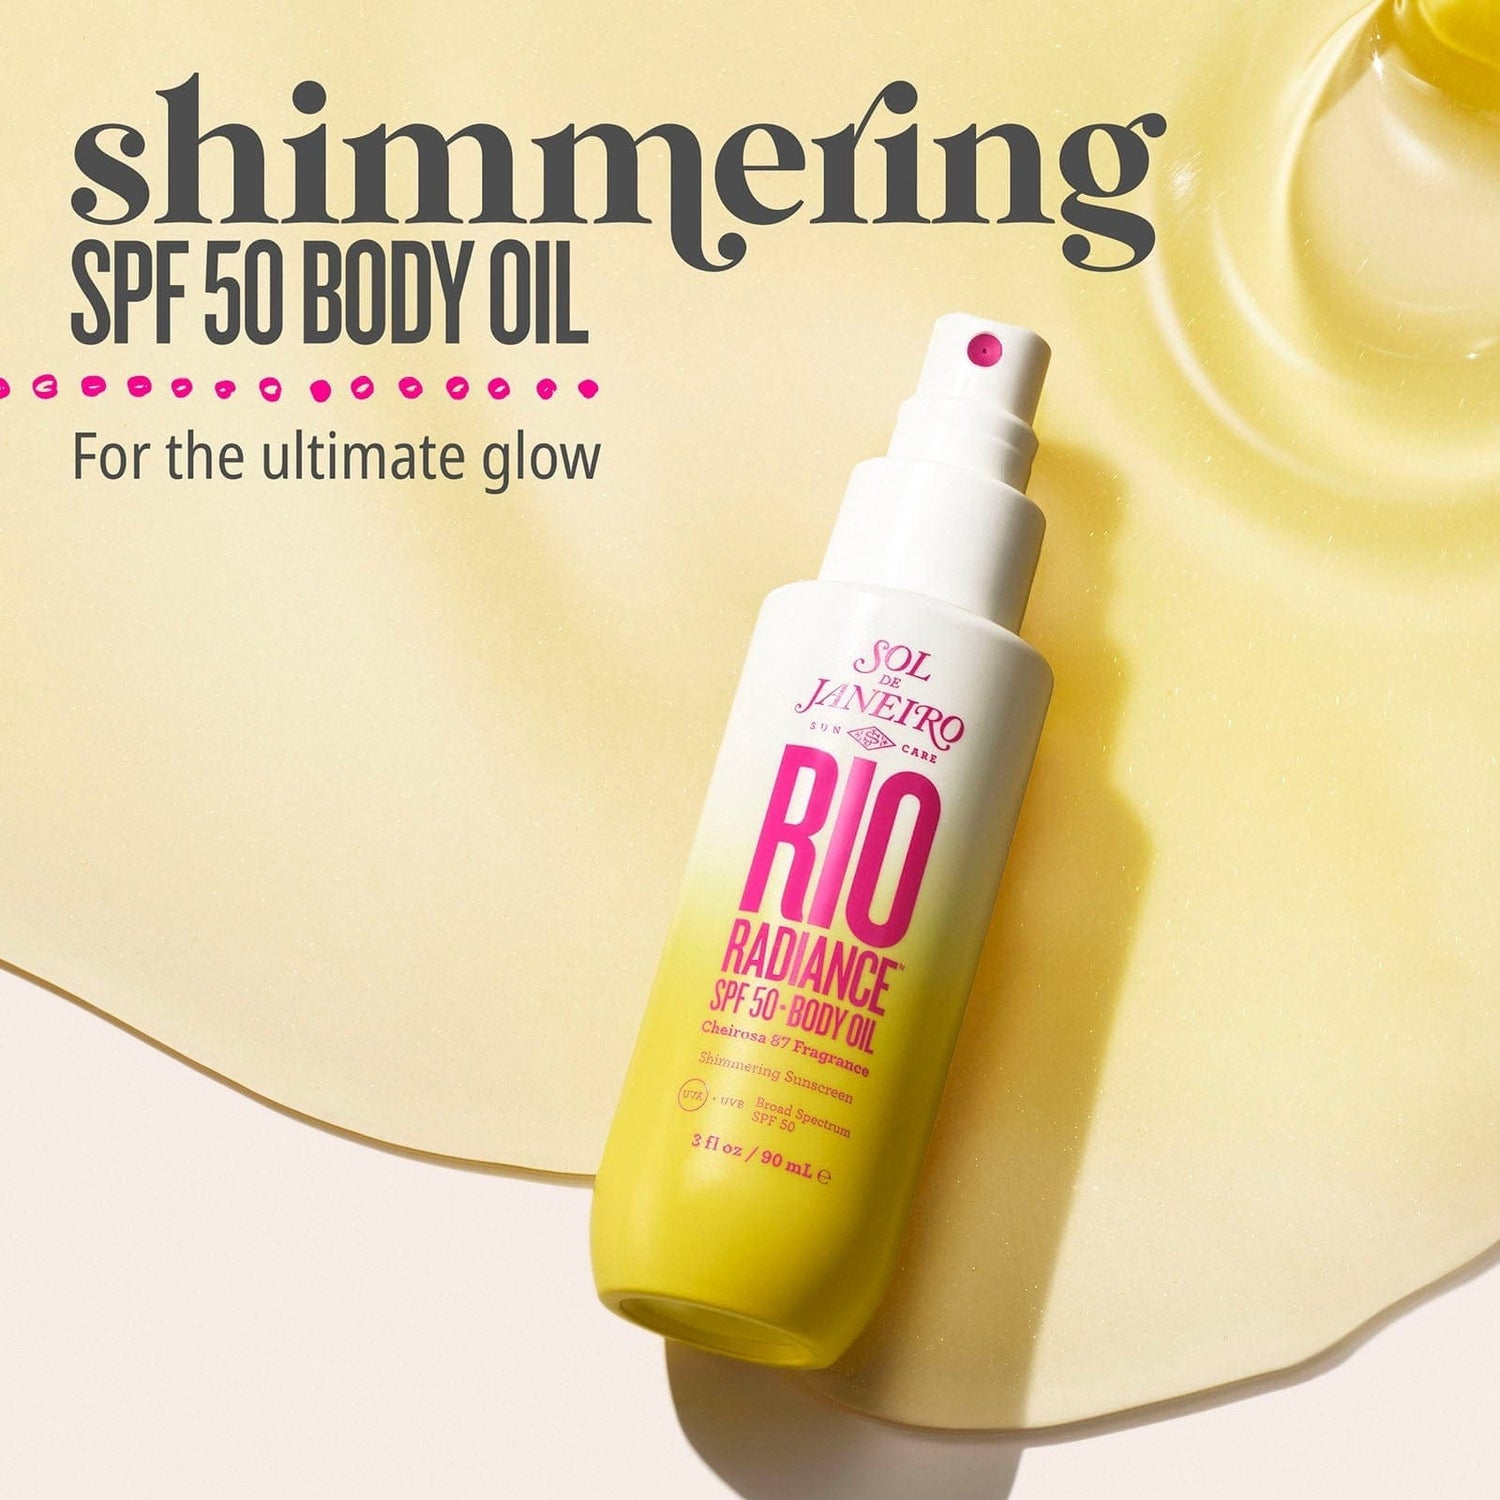 Shimmering SPF 50 body oil, for the ultimate glow